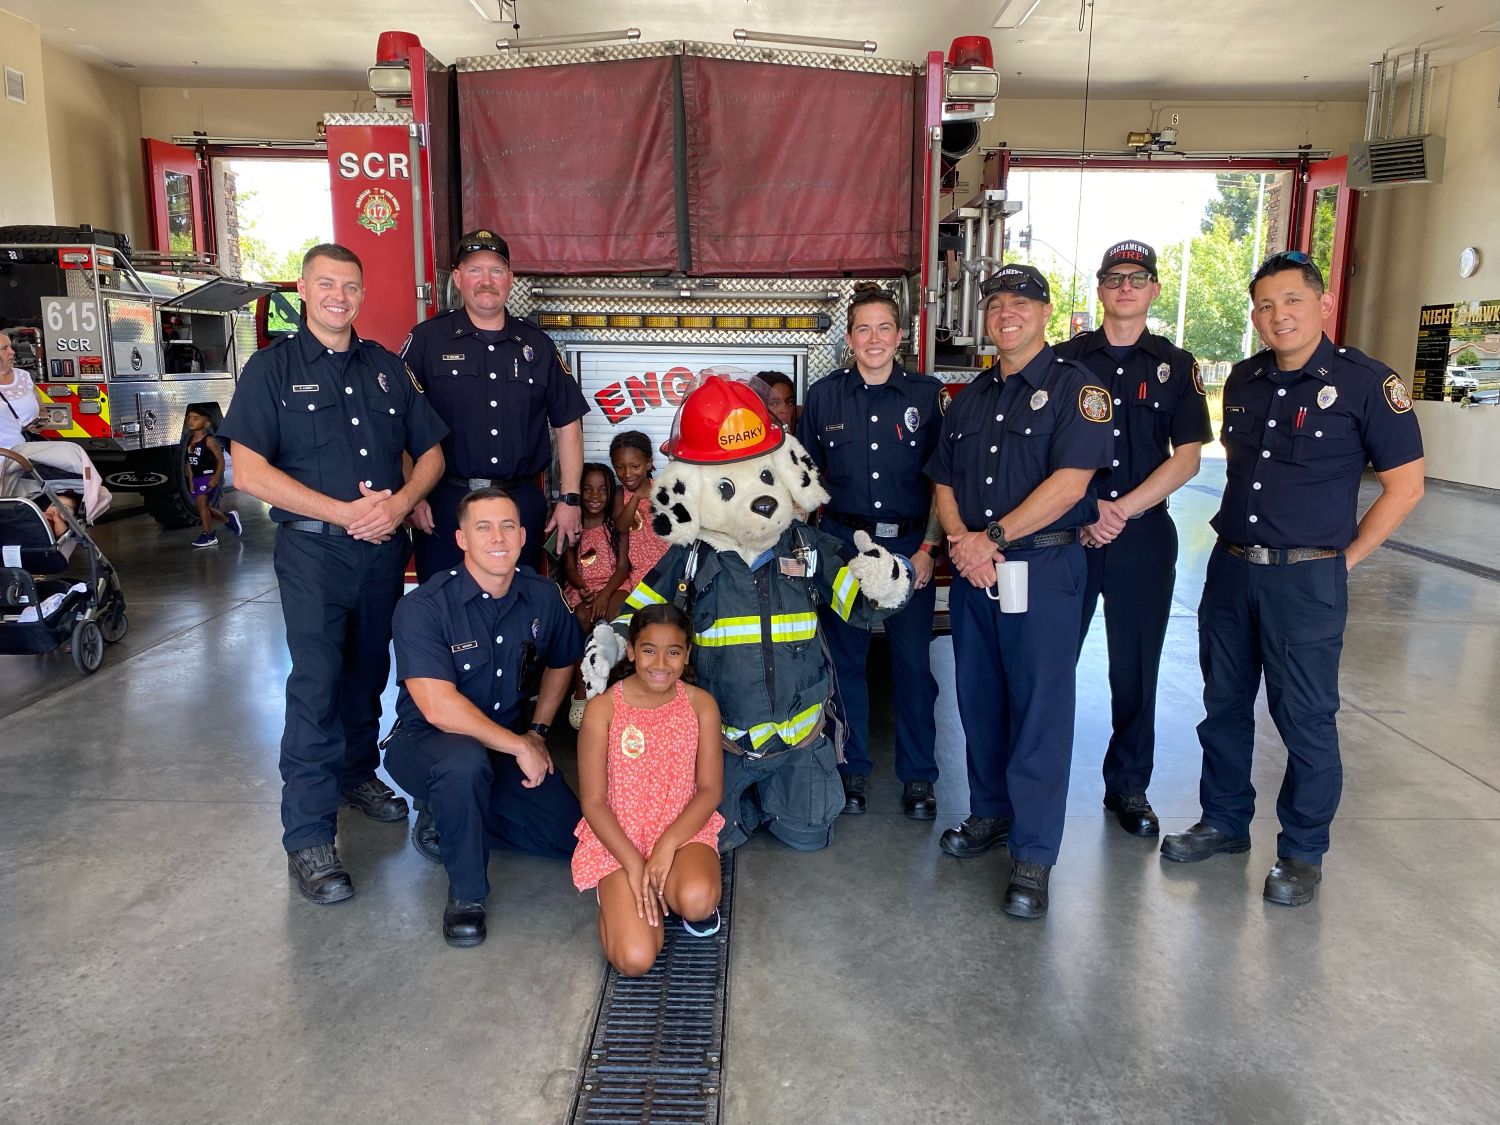 Seven firefighters posing with kids and the sparky mascot with a fire engine behind them.